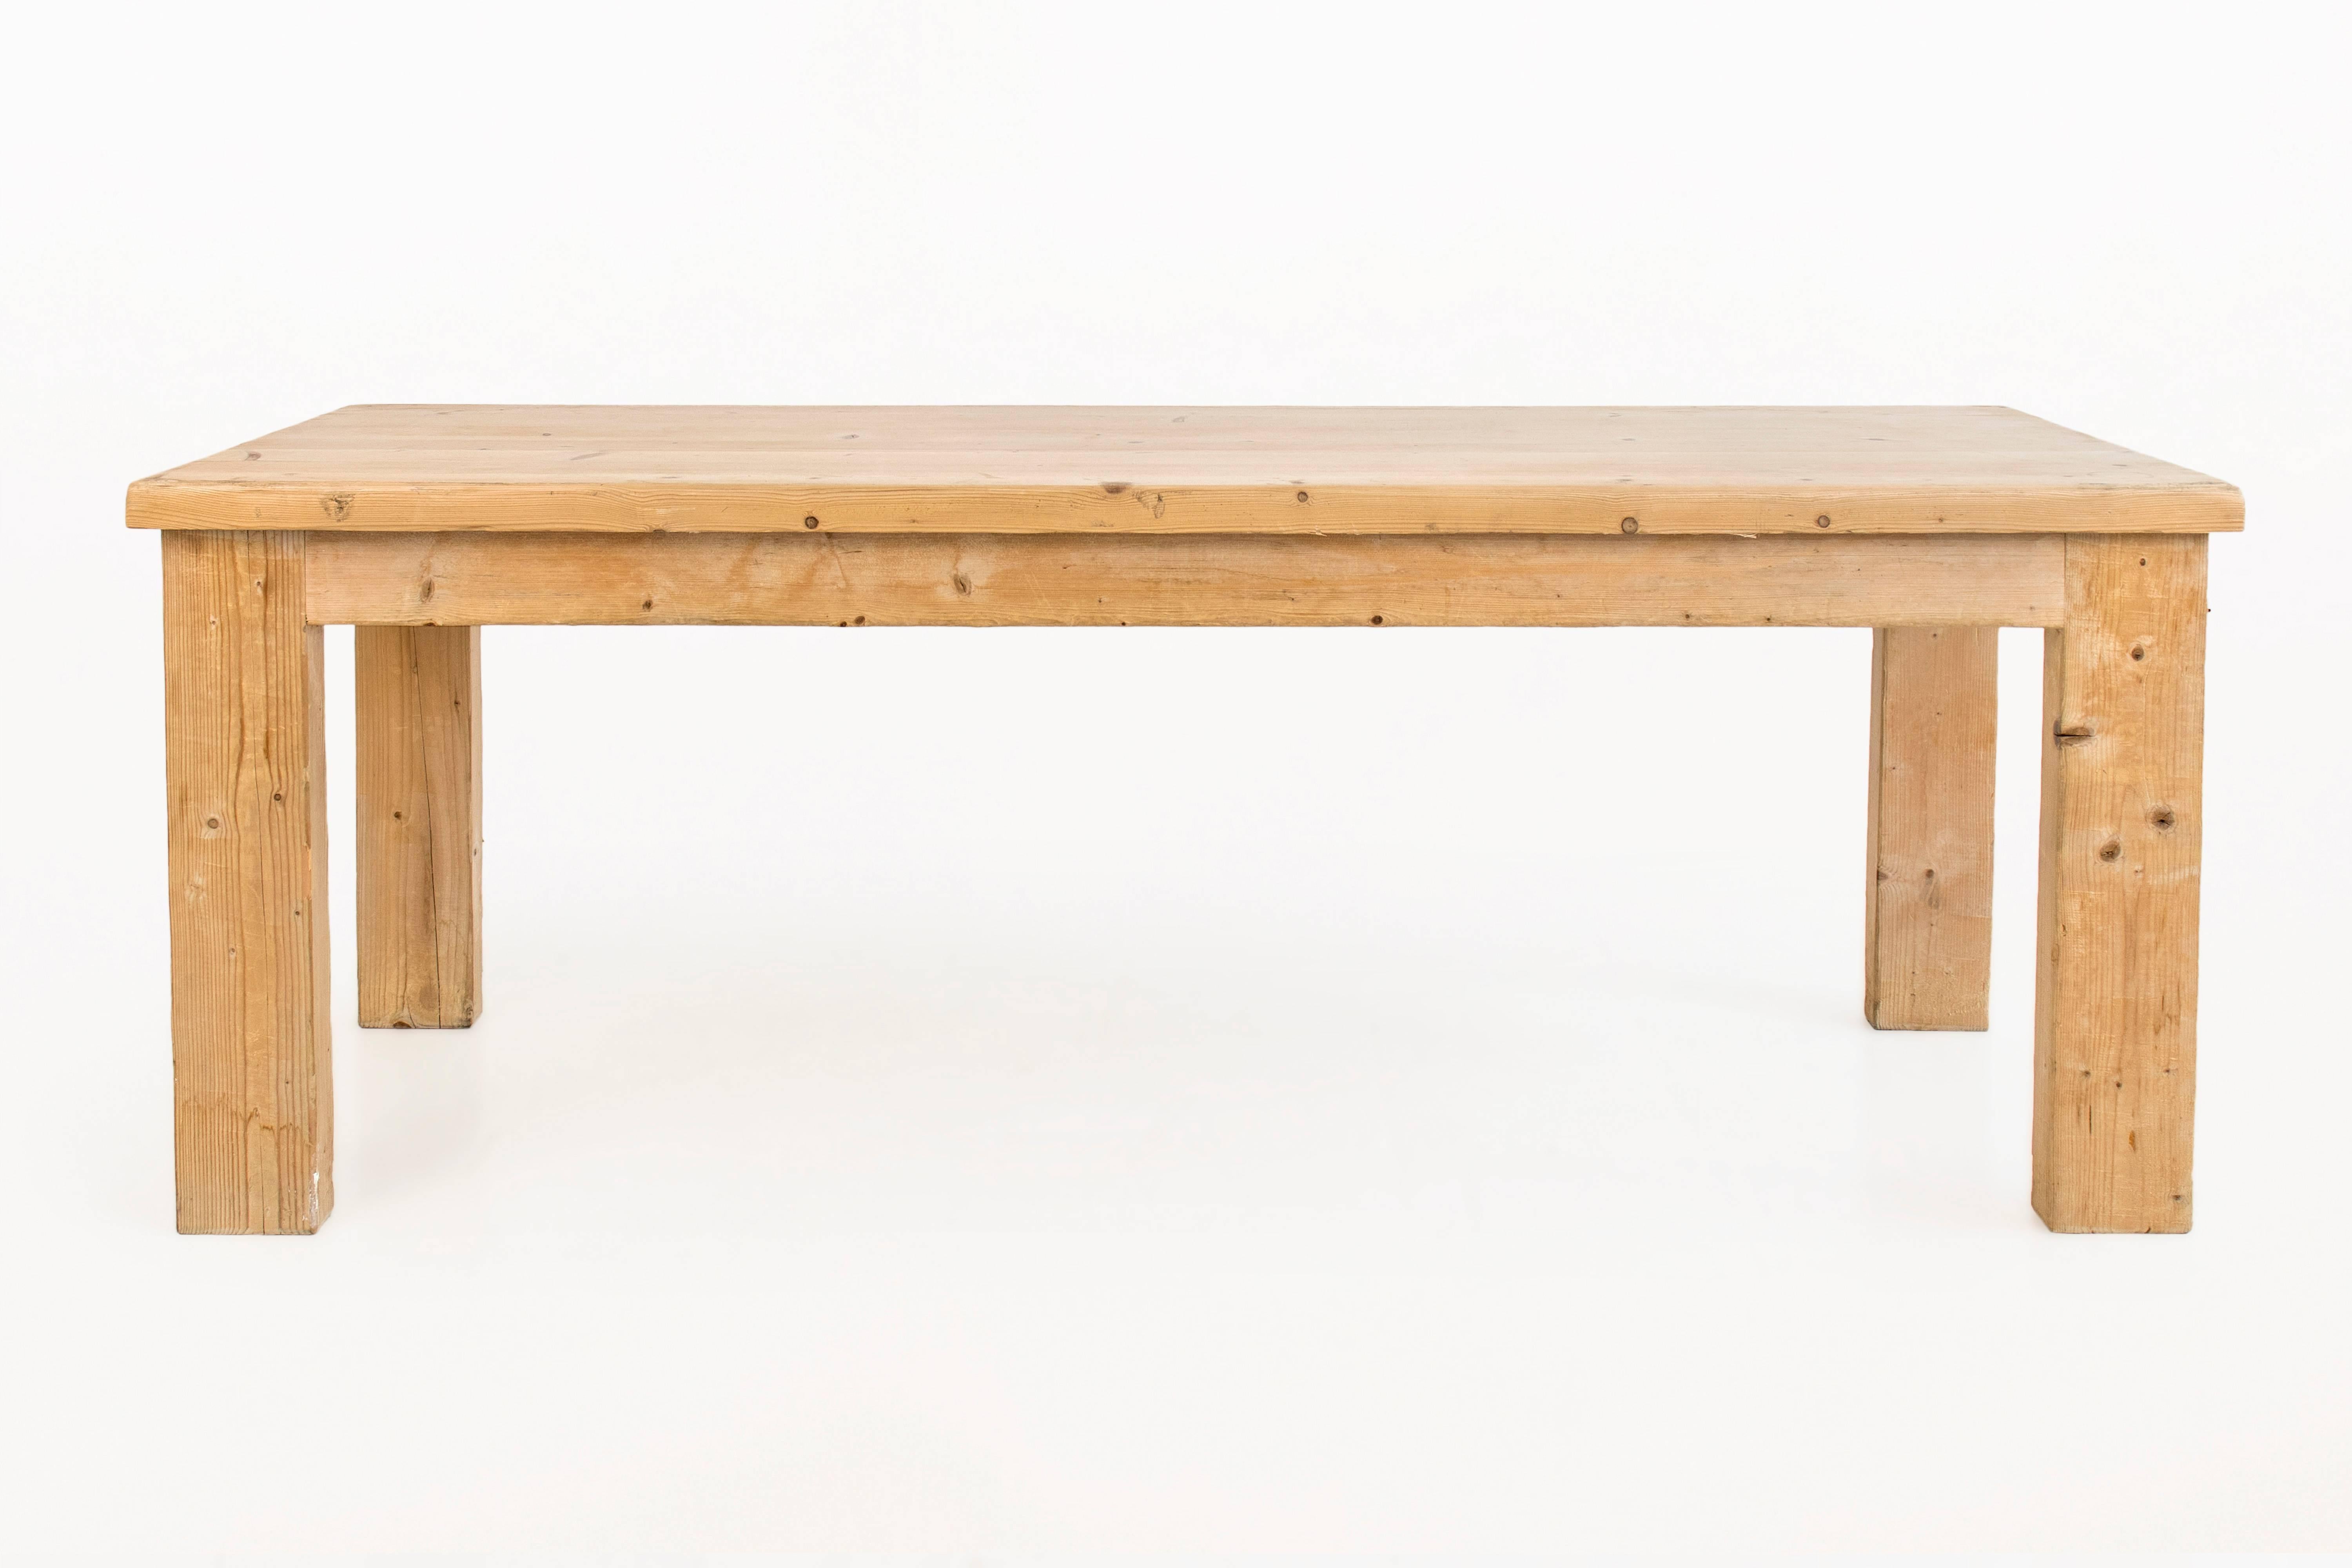 Pine dining table by Guy Rey-Millet & Jean Prouvé
Pine tabletop and legs
Furniture designed by Millet & Prouvé for the Jean Prouvé mountain refuge at the Vanoise Pass, Savoie, France
circa 1972, France
Good vintage condition
Provenance: the